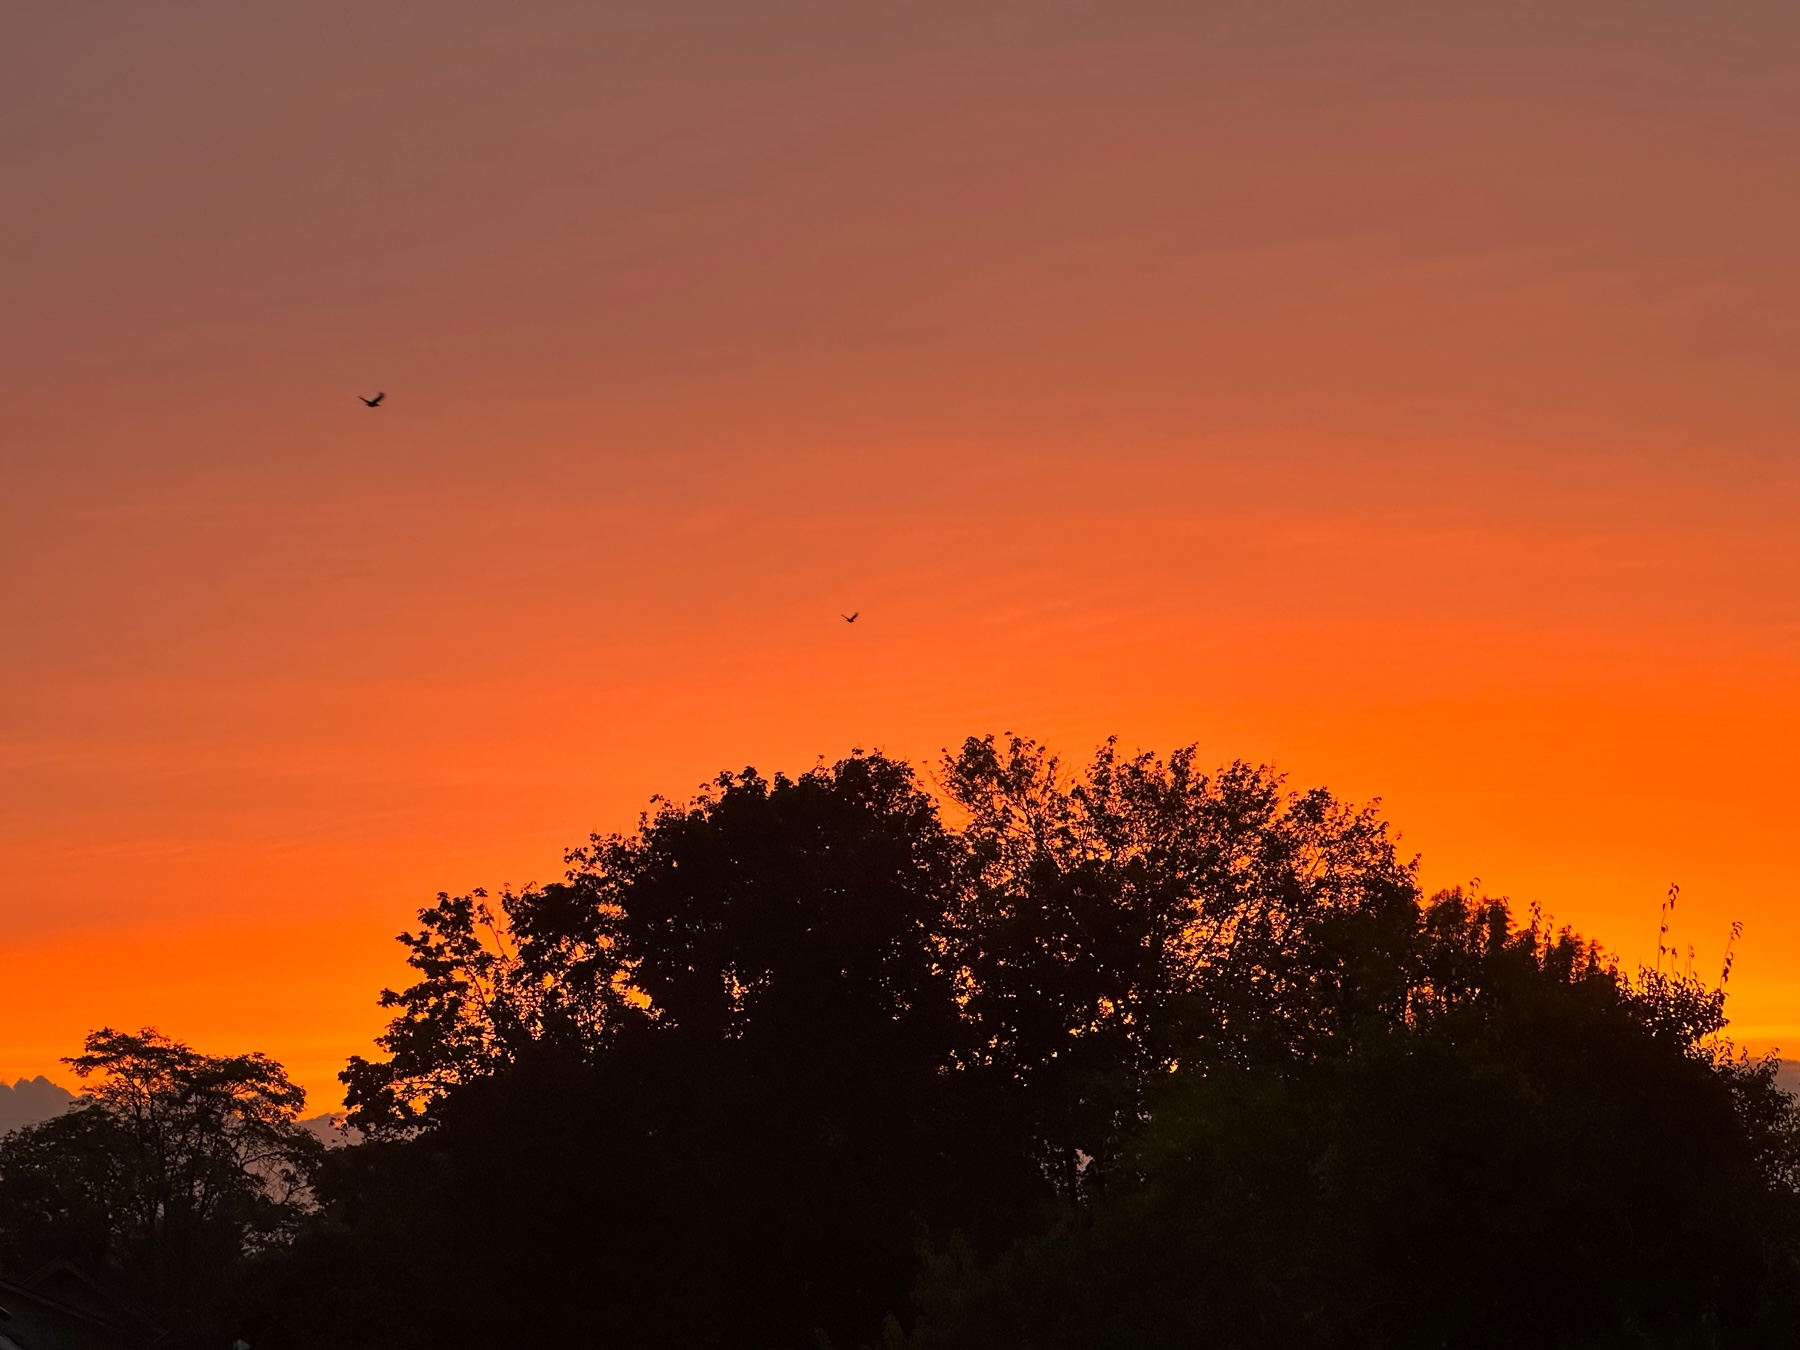 A view of the sunrise with colors going from golden yellow on the horizon to bright orange to dark orange with the silhouette of a tree in the foreground.